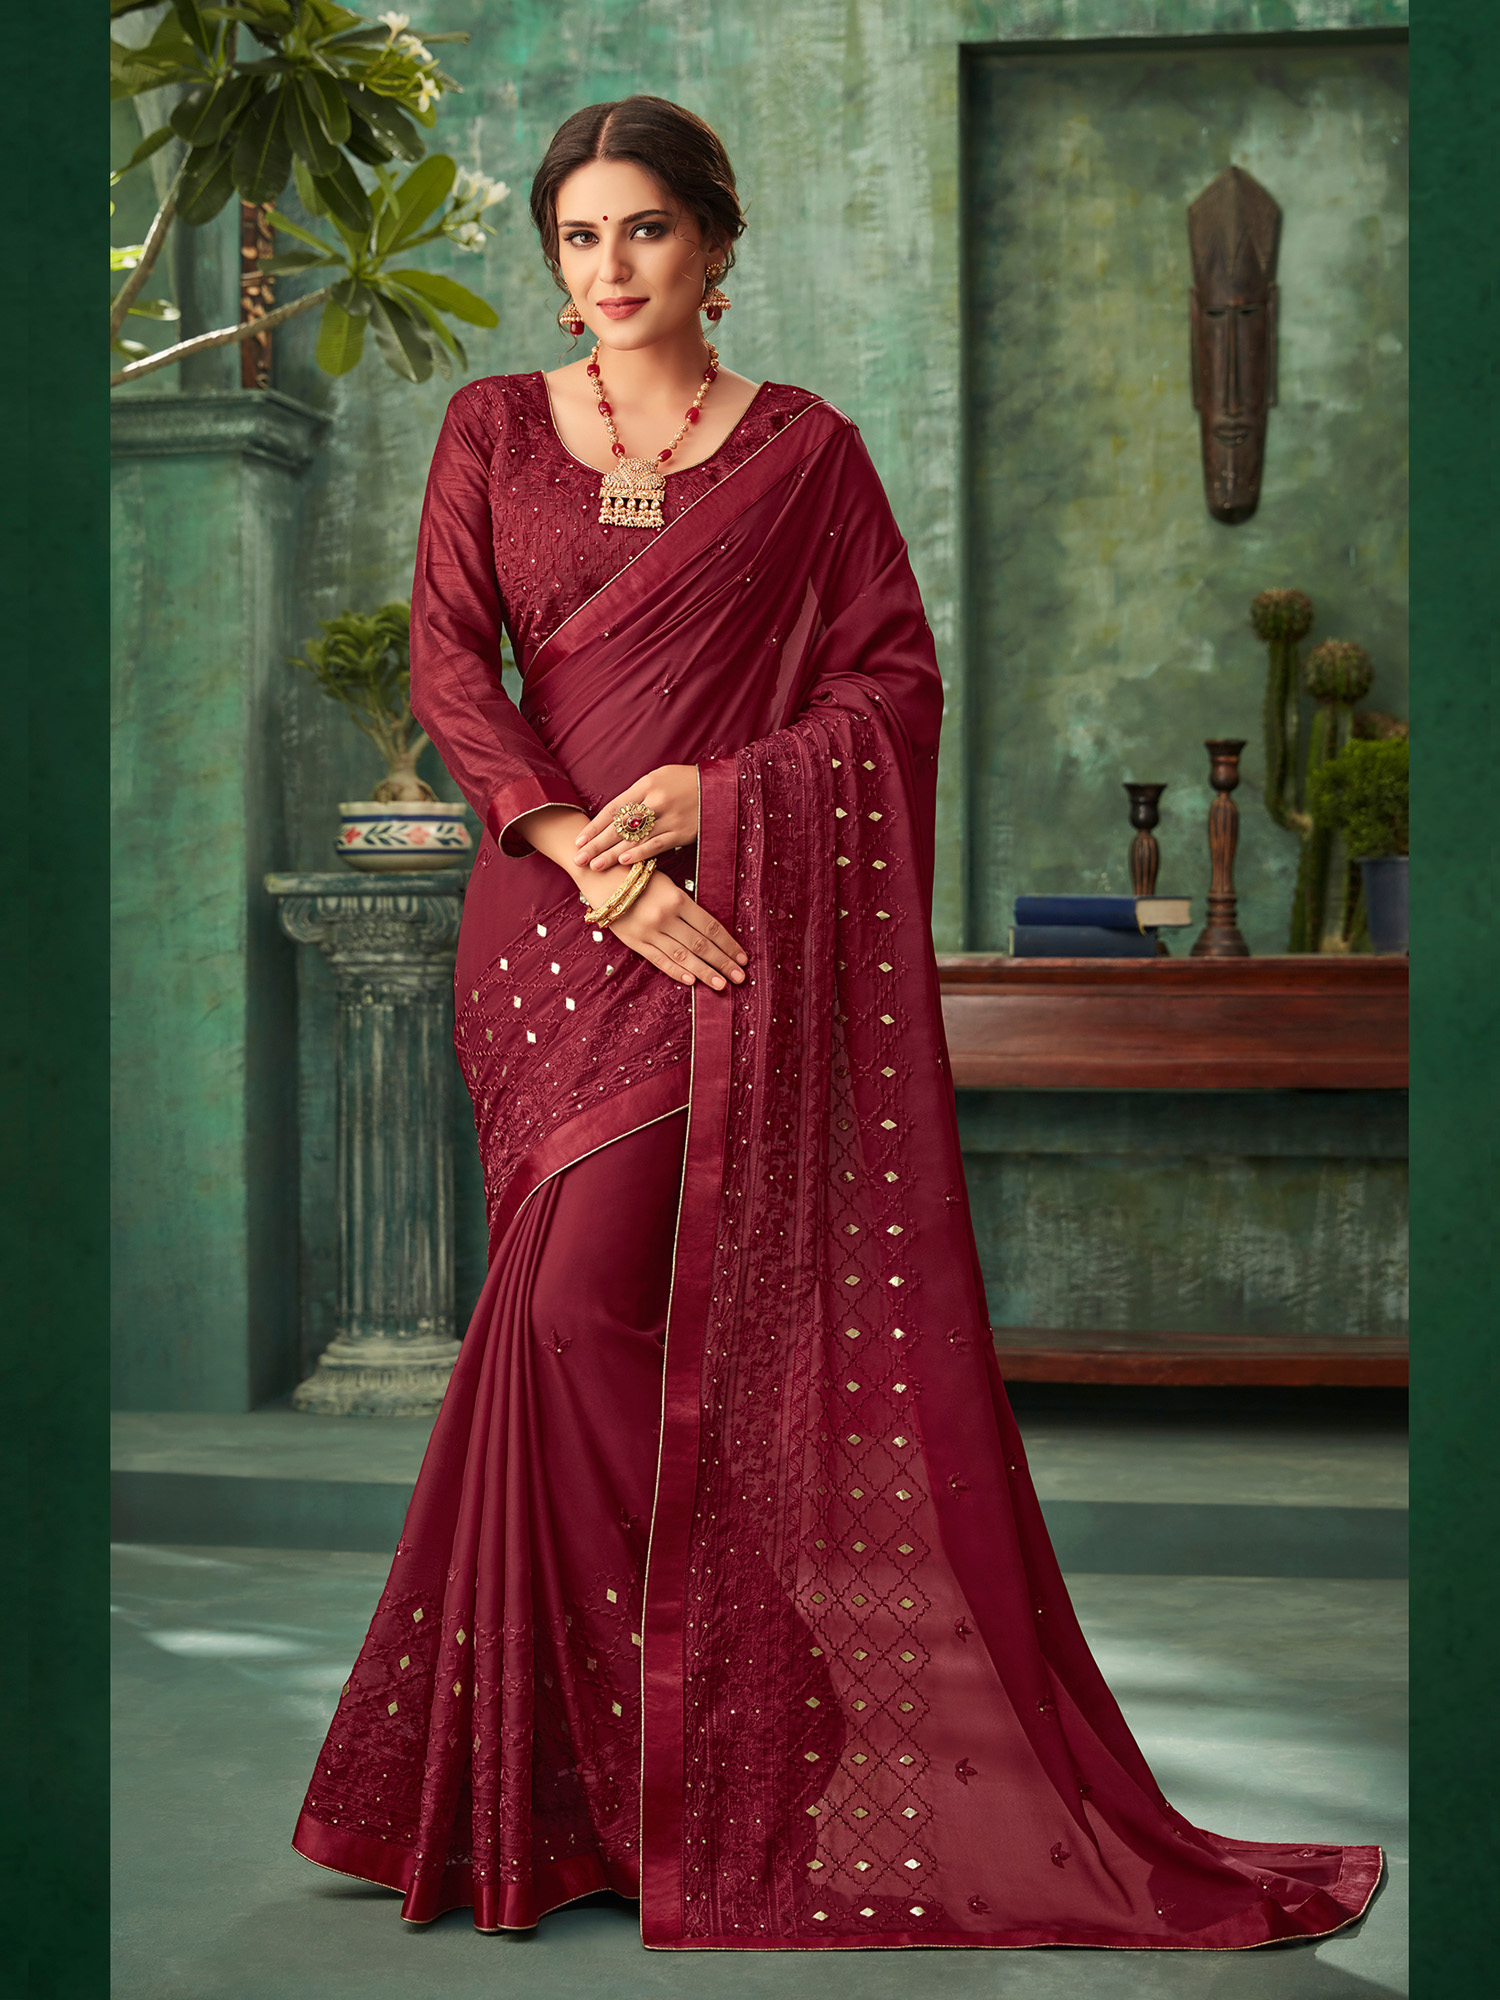 Rangoli Designer Georgette With Embroidery Work Sarees Colle...